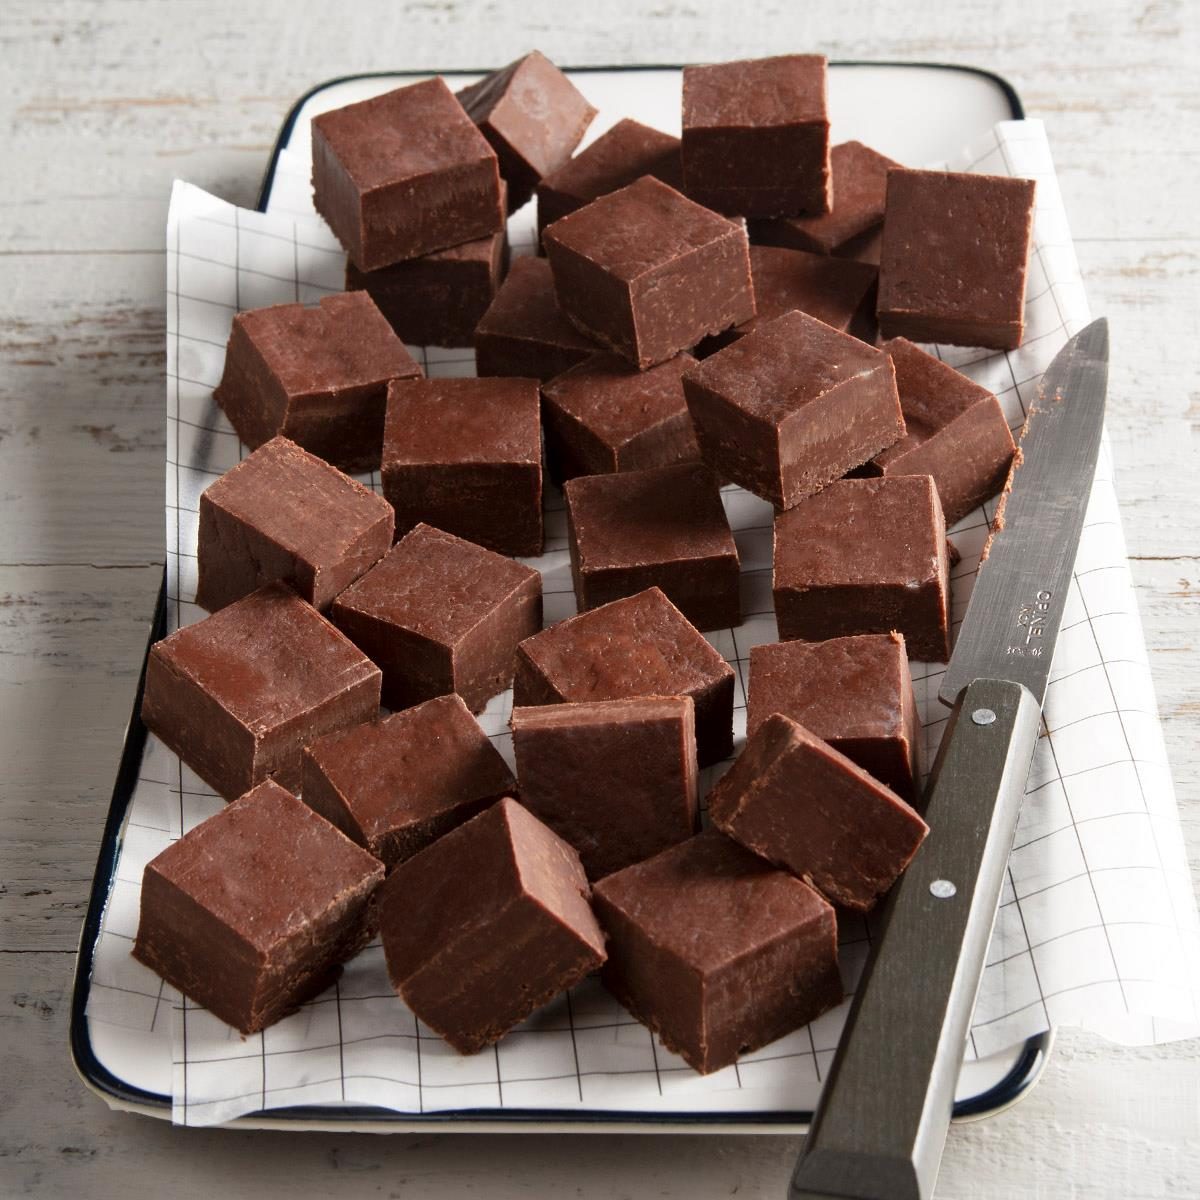 Common Fudge Mistakes And How To Fix Them